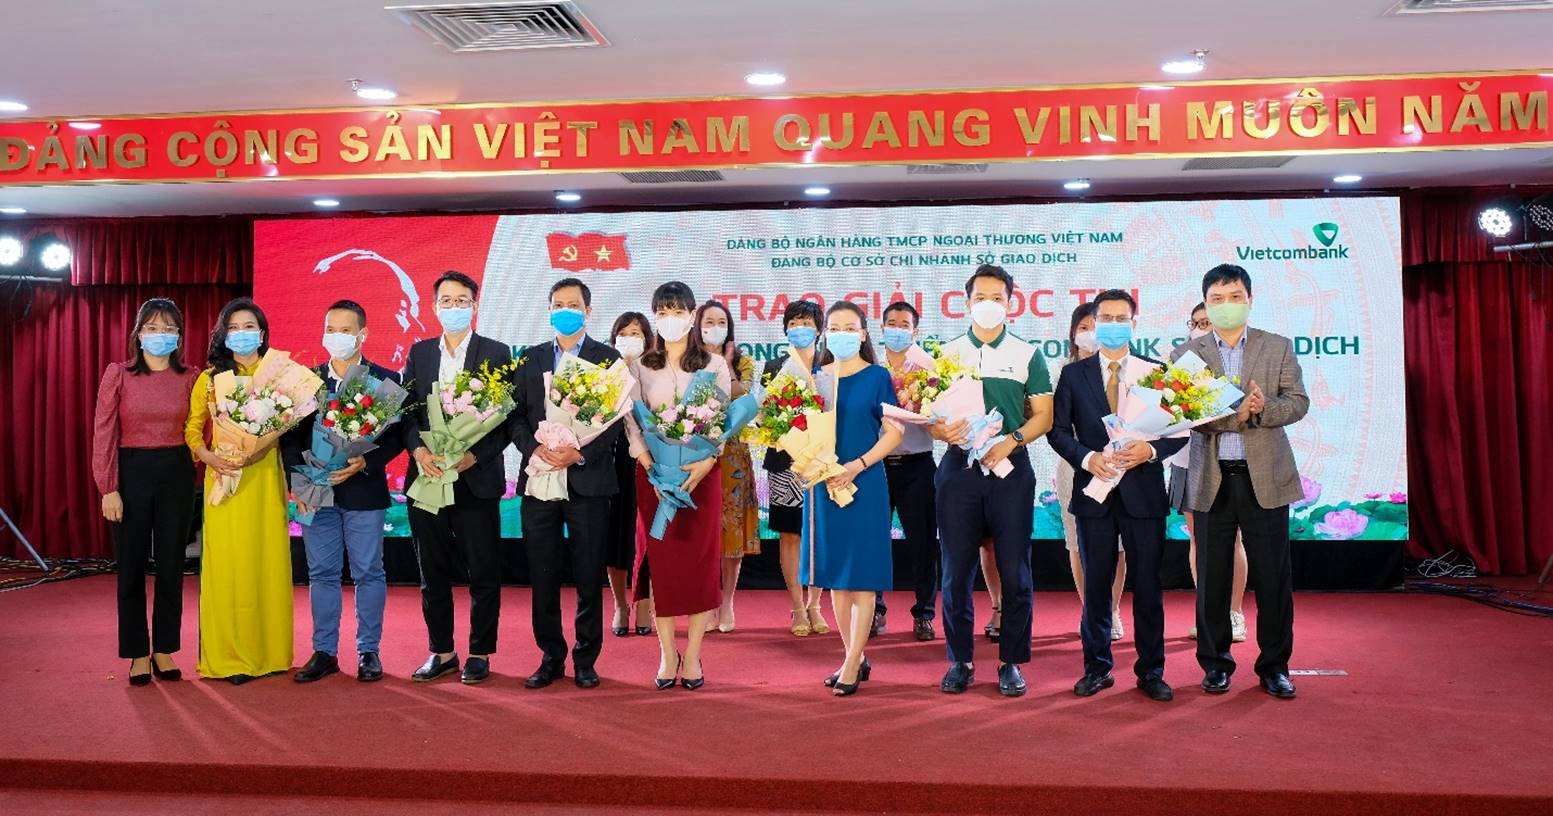 khoi day khat vong phat trien vietcombank so giao dich